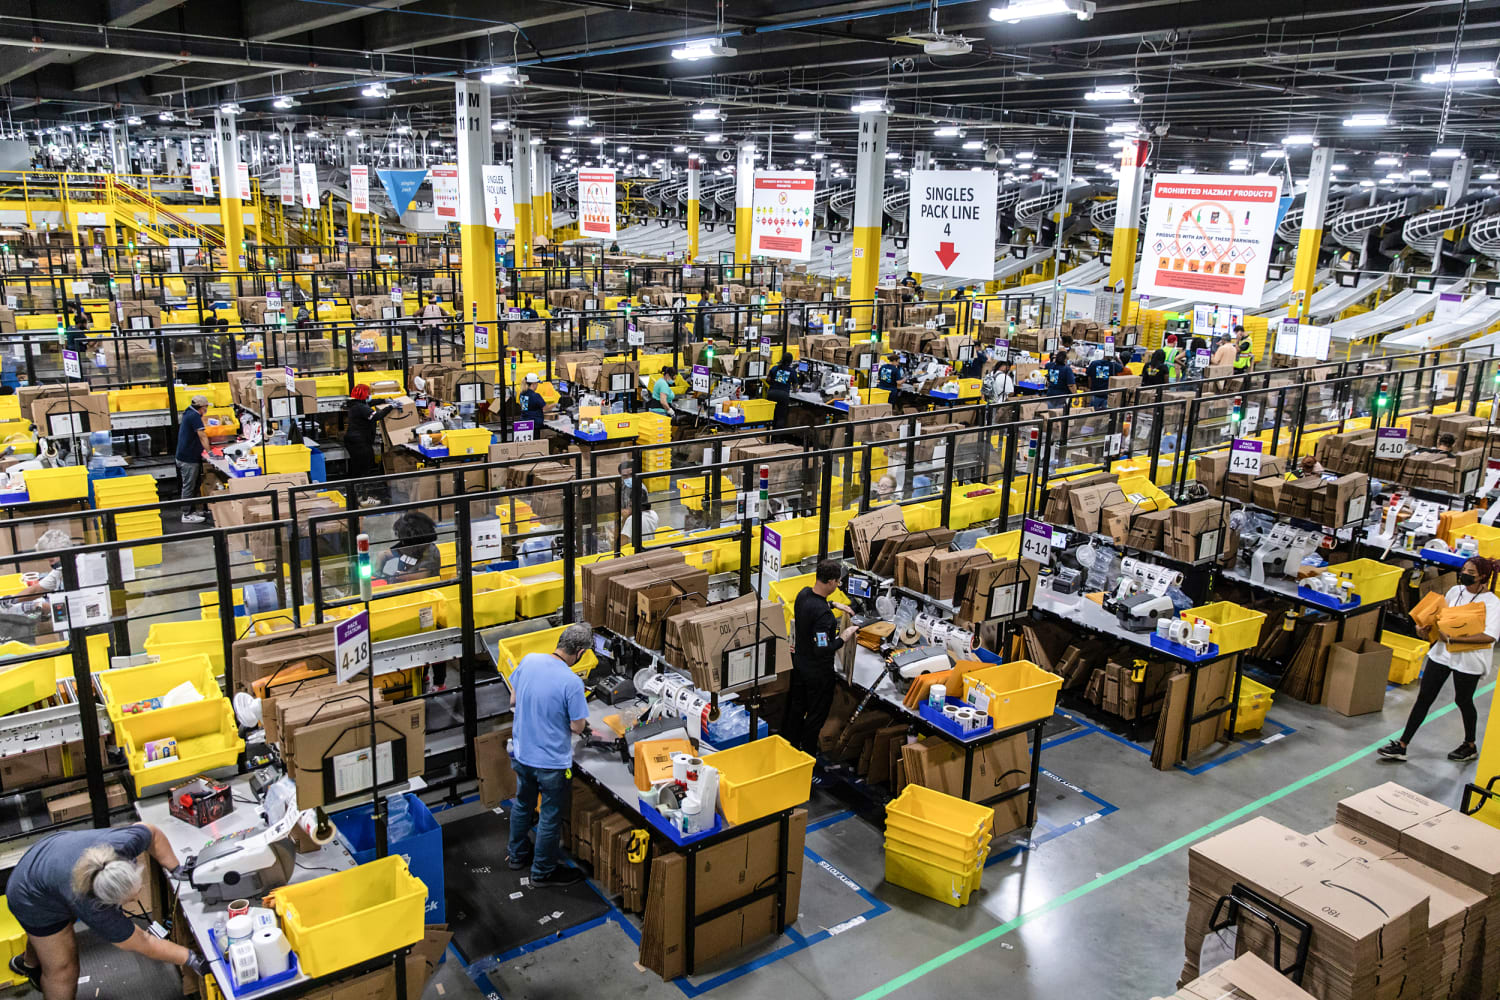 Amazon employs over 1M people, including many part time workers.